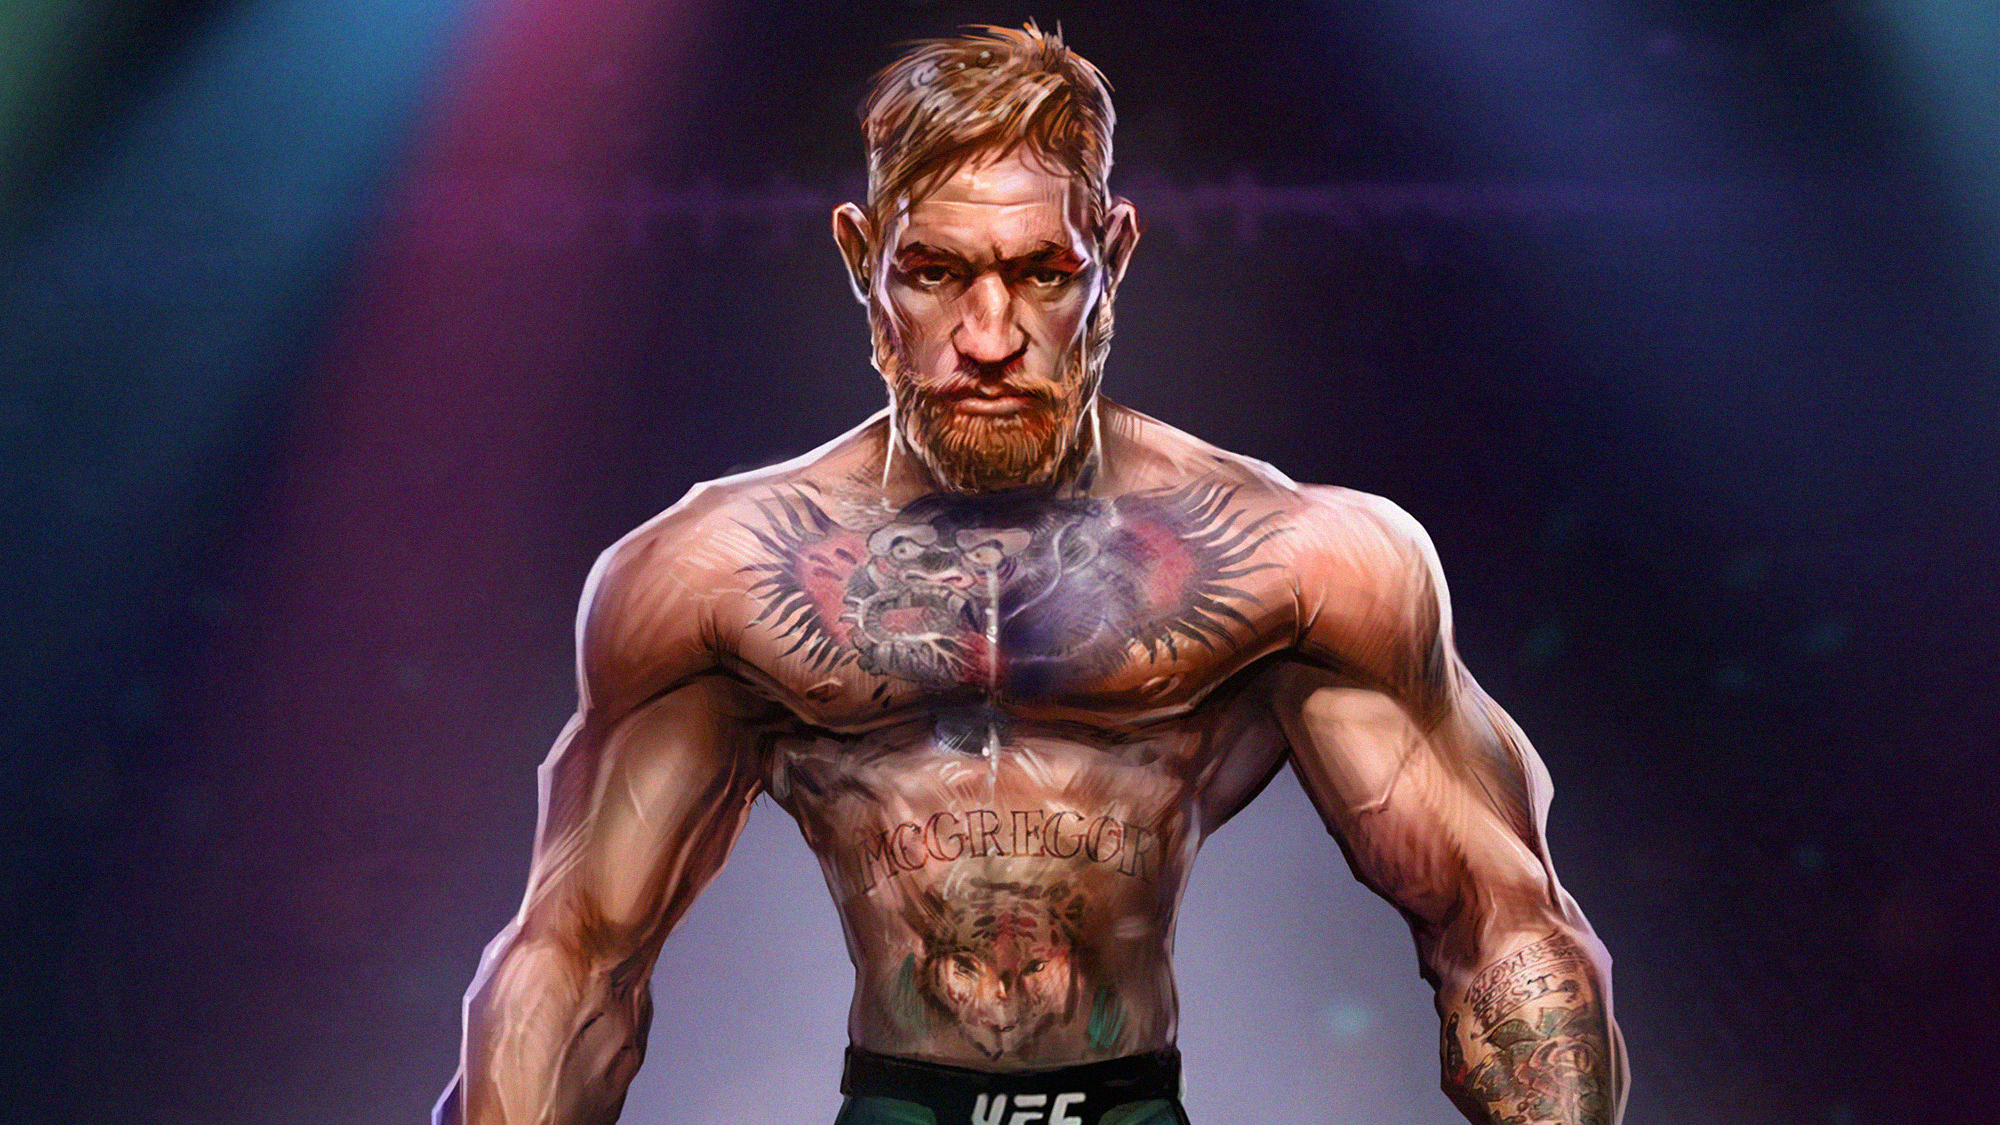 Conor mcgregor ufc hd sports k wallpapers images backgrounds photos and pictures